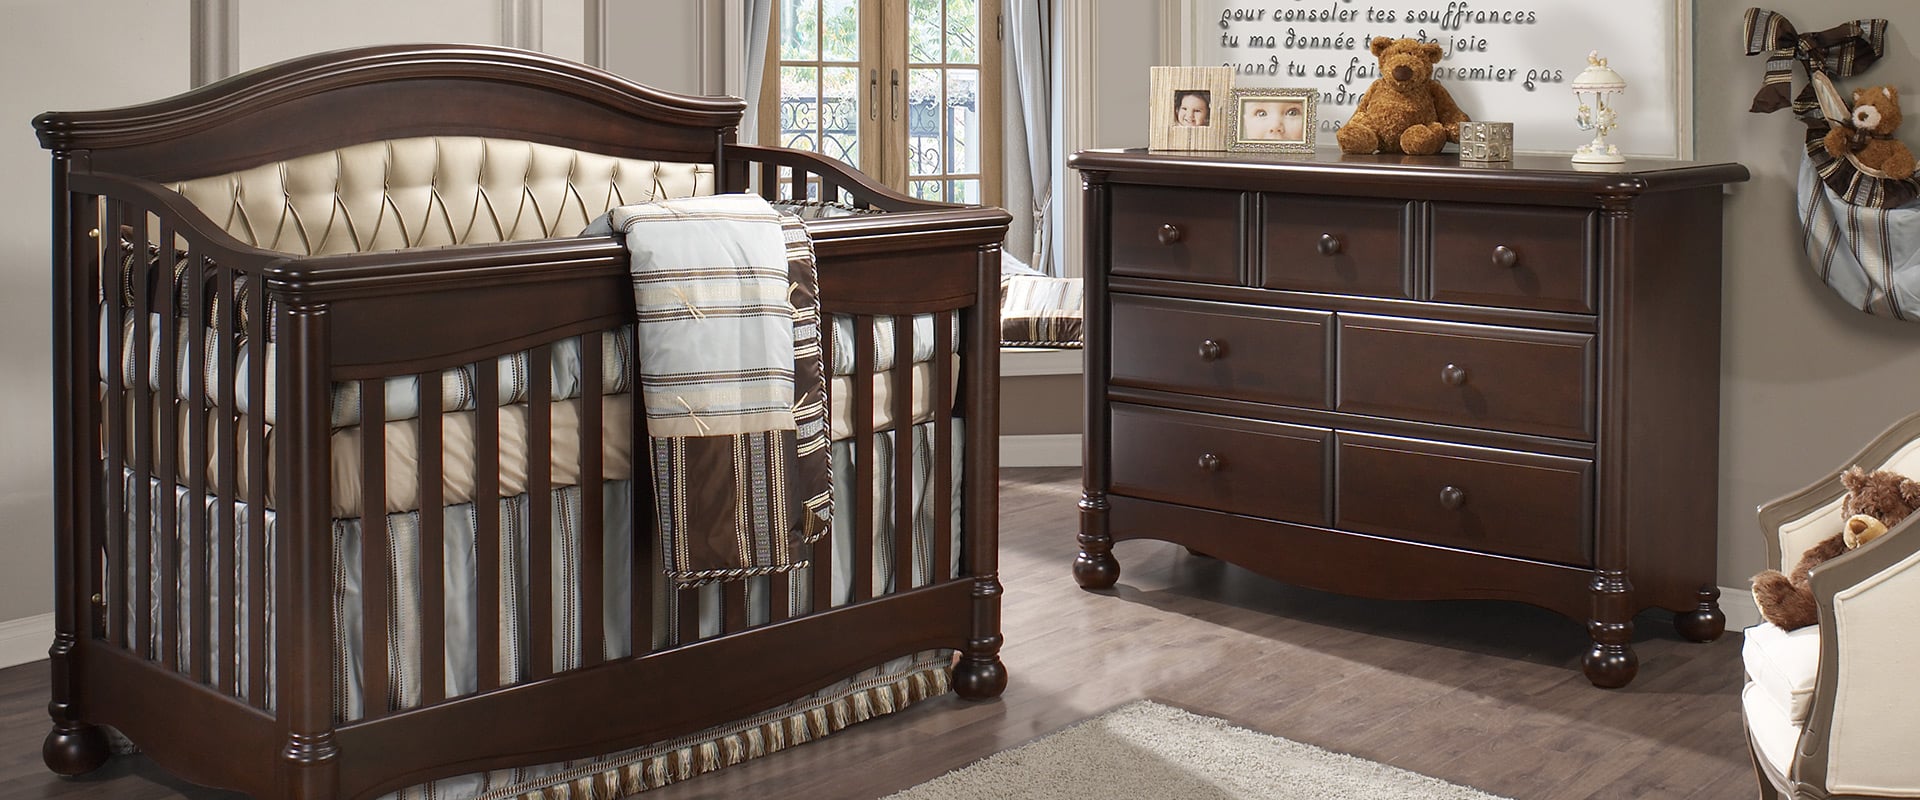 Collection Avalon Furniture Baby Room In Cocoa With Panel In